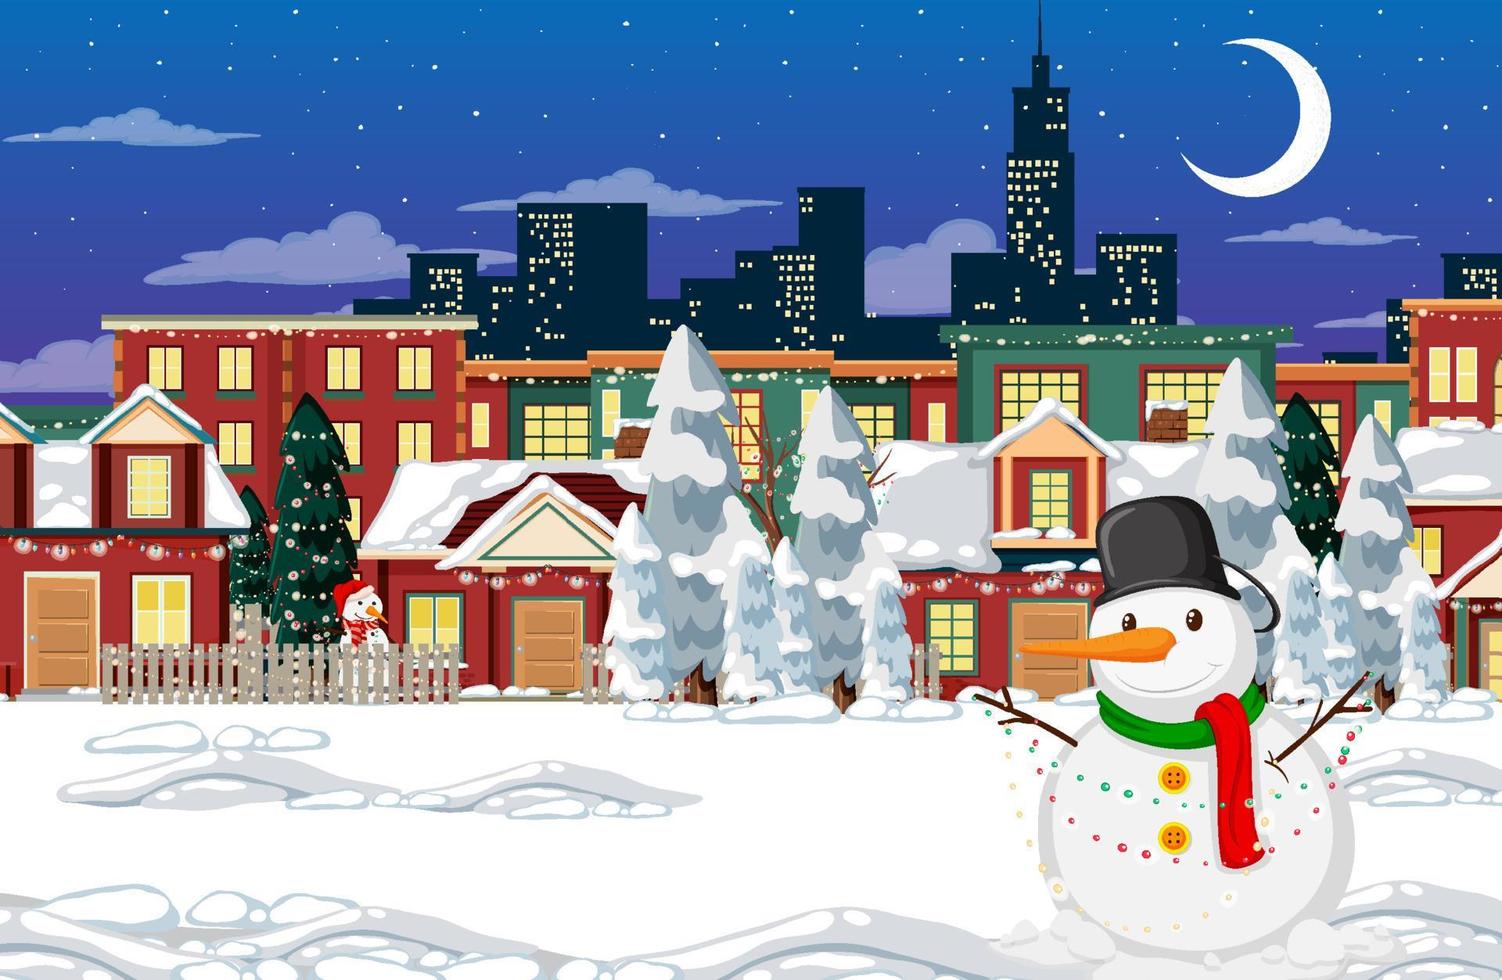 Winter snowy night town with a snowman vector